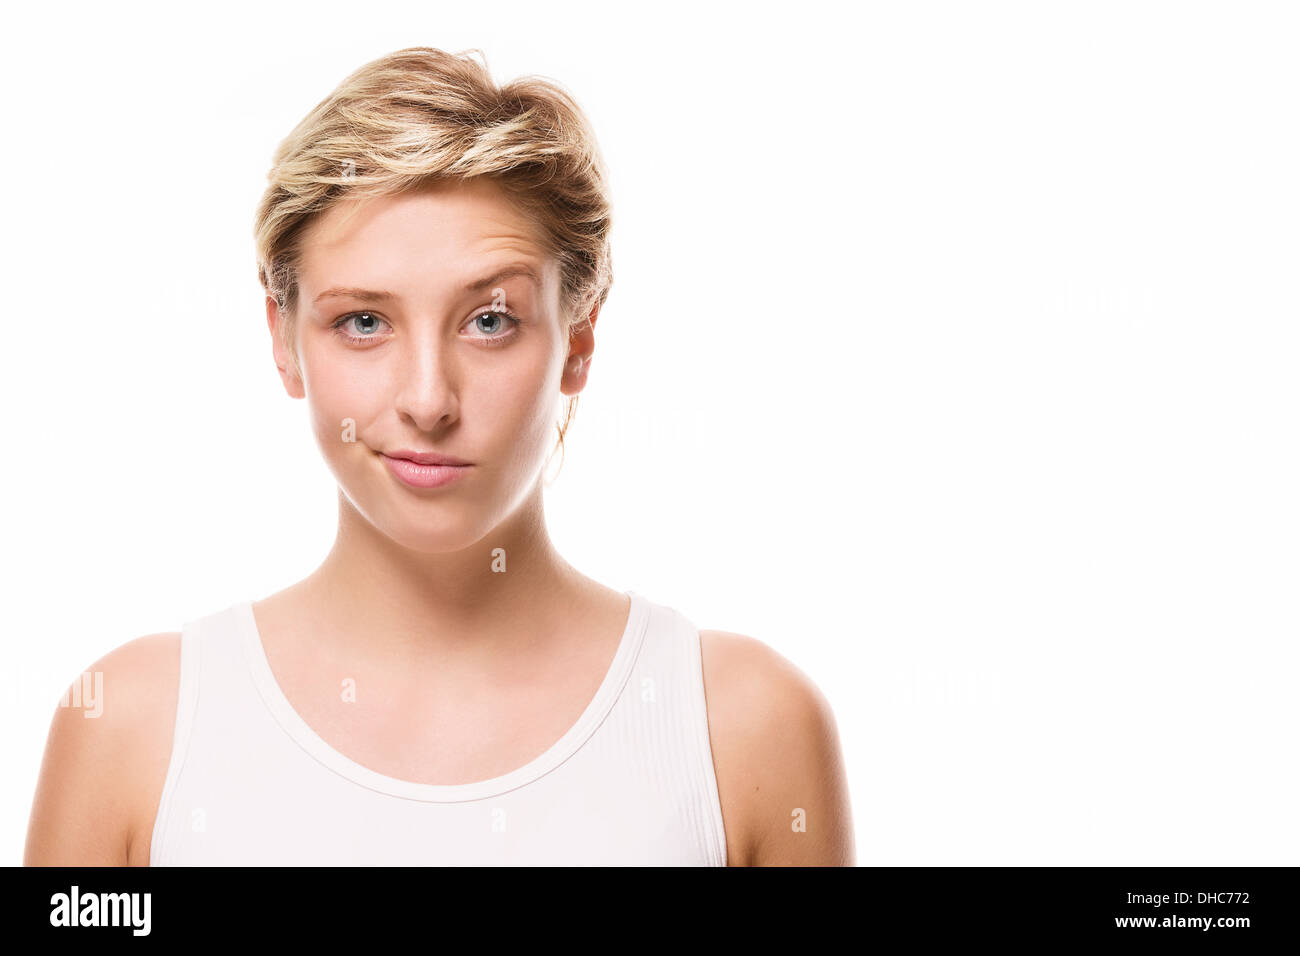 young blonde woman lifting eyebrow on white background Stock Photo